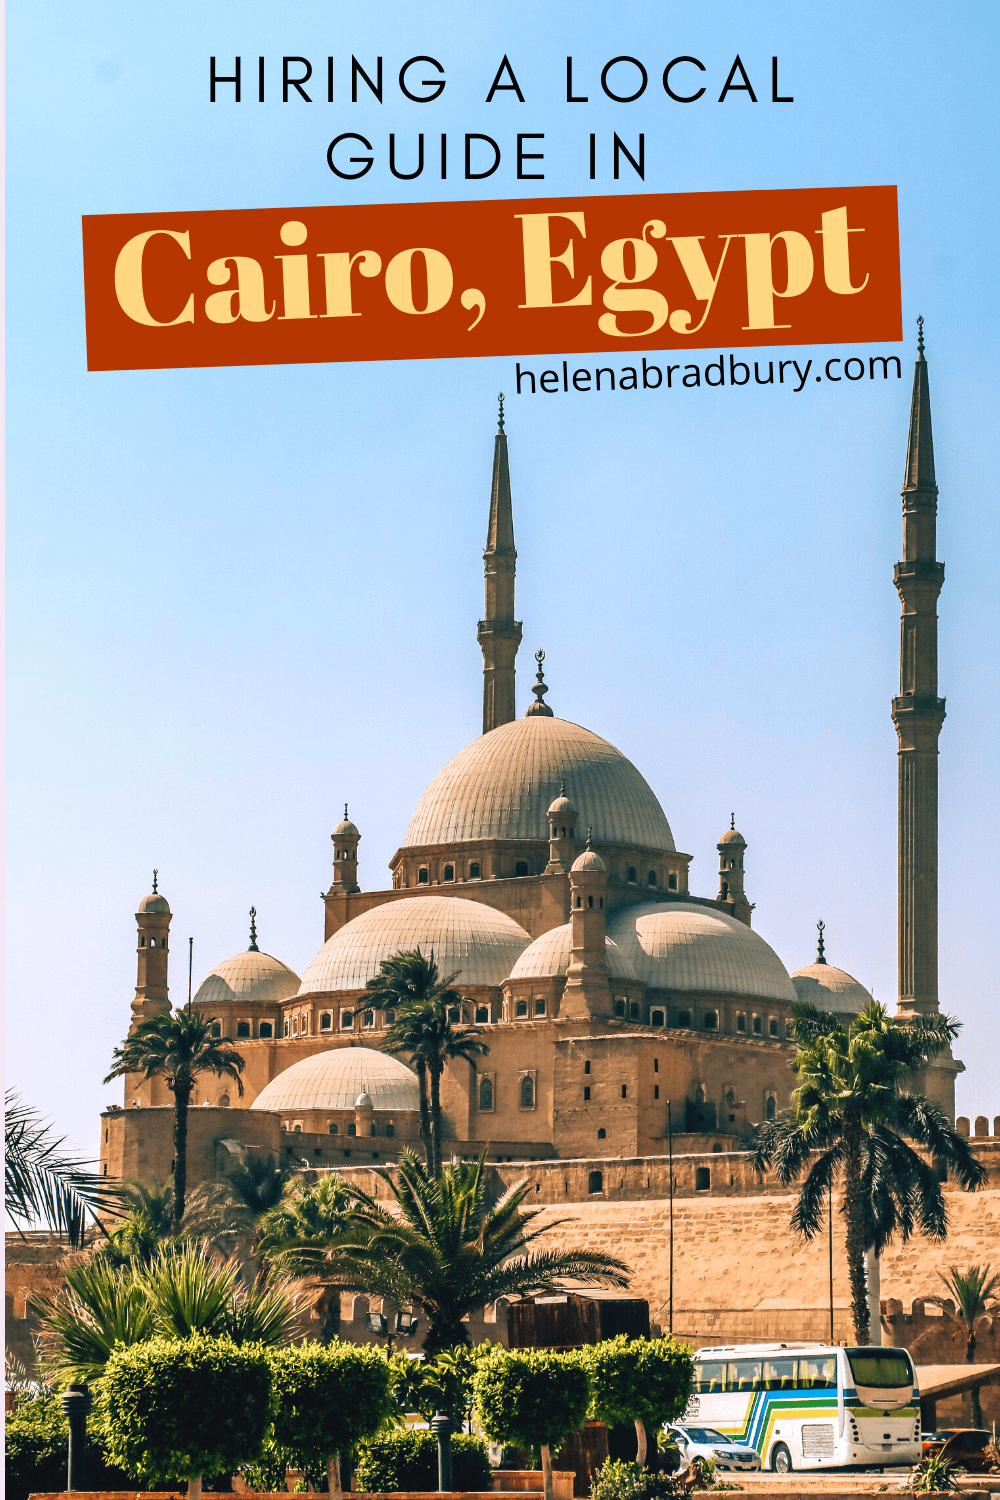 Why you should hire a guide for your trip to Egypt